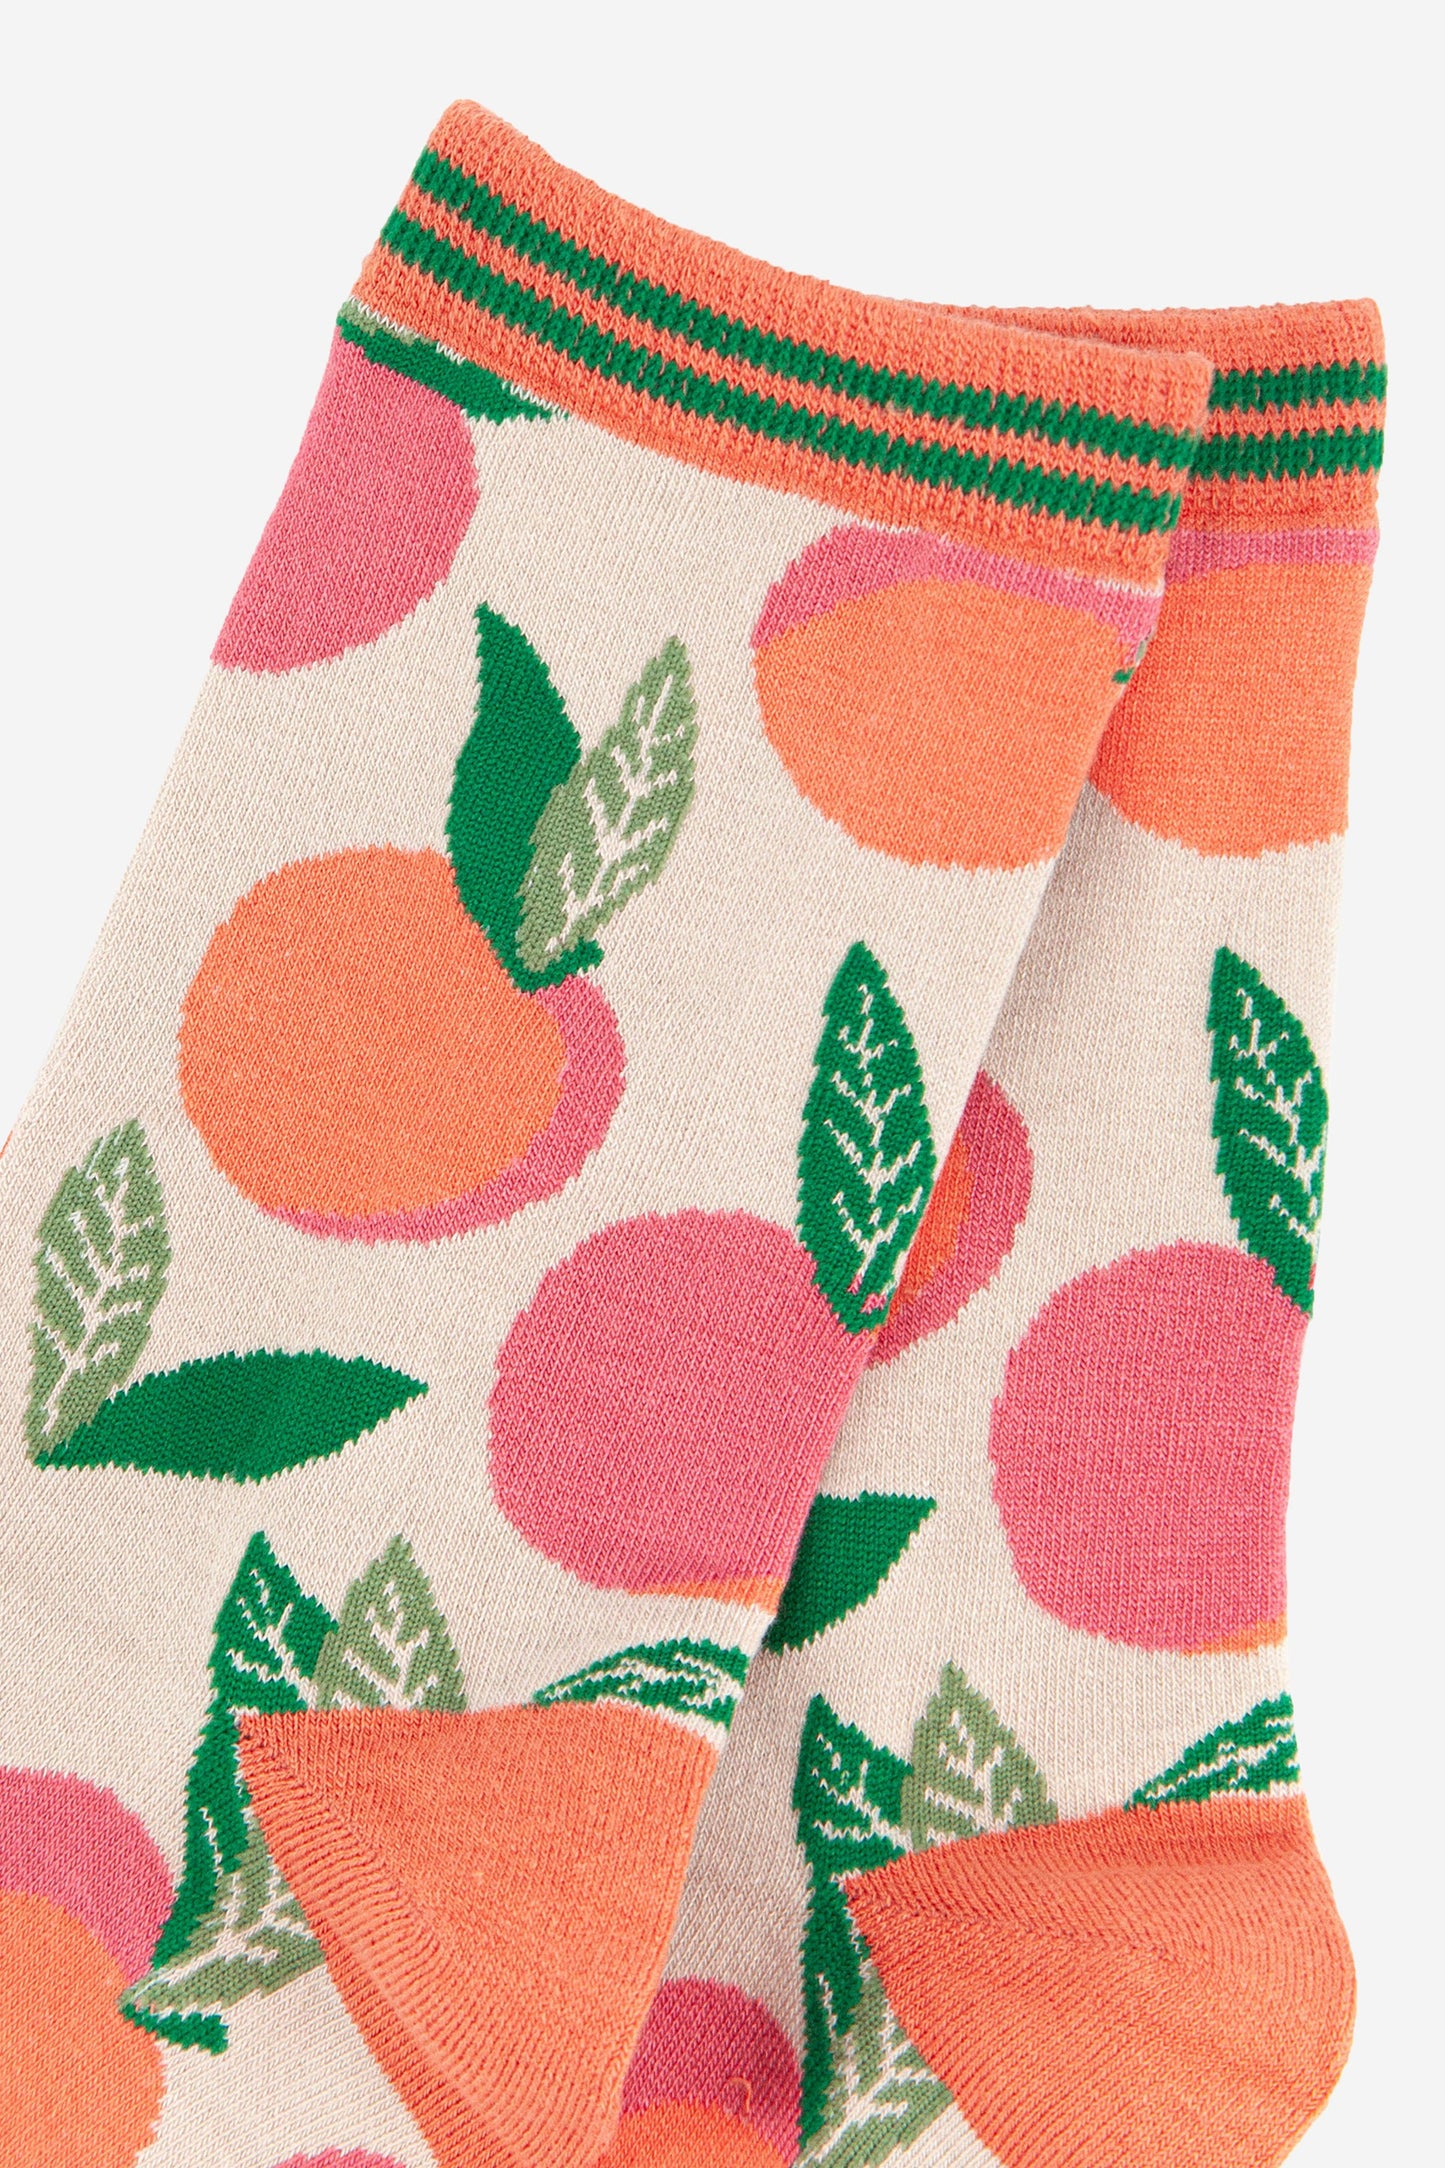 close up of the peaches pattern and striped cuff on the bamboo socks